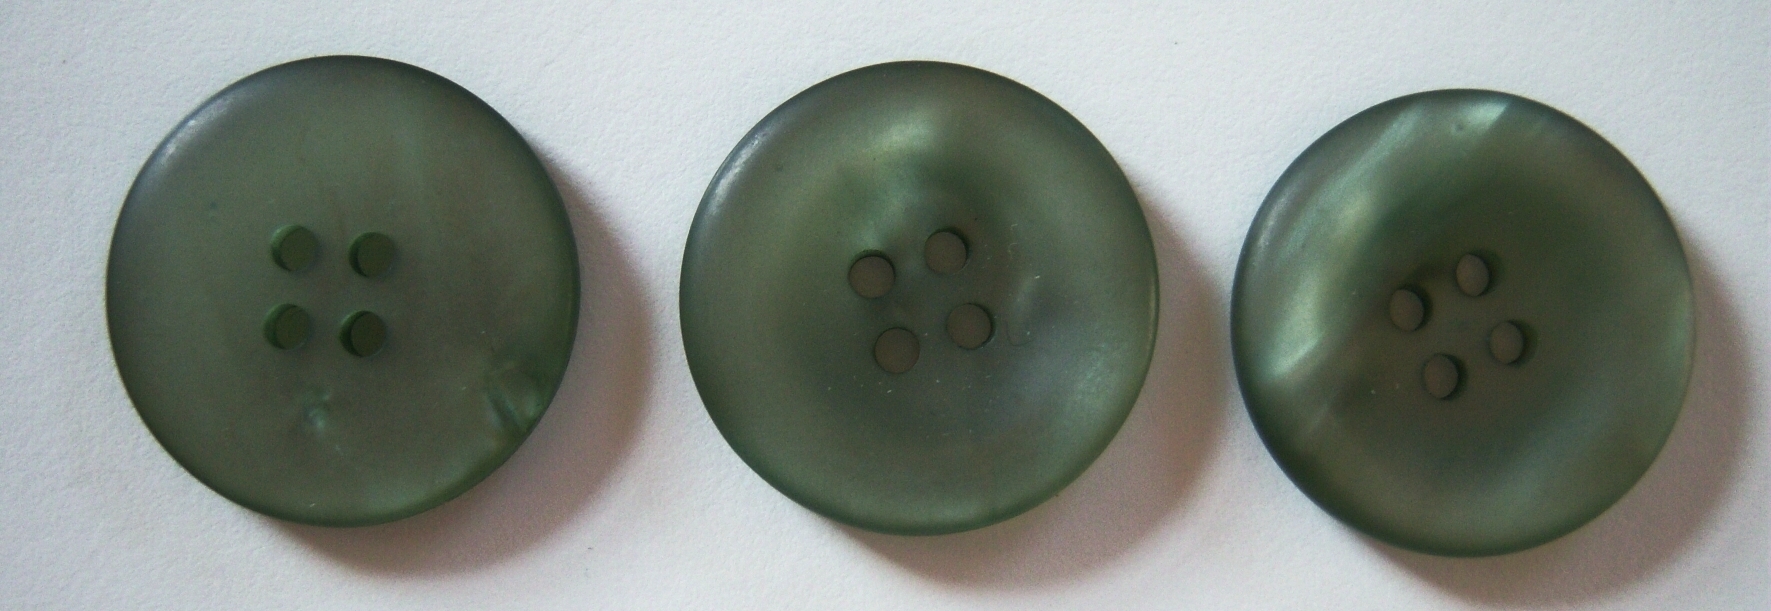 Green Pearlized 1" 4 Hole Button